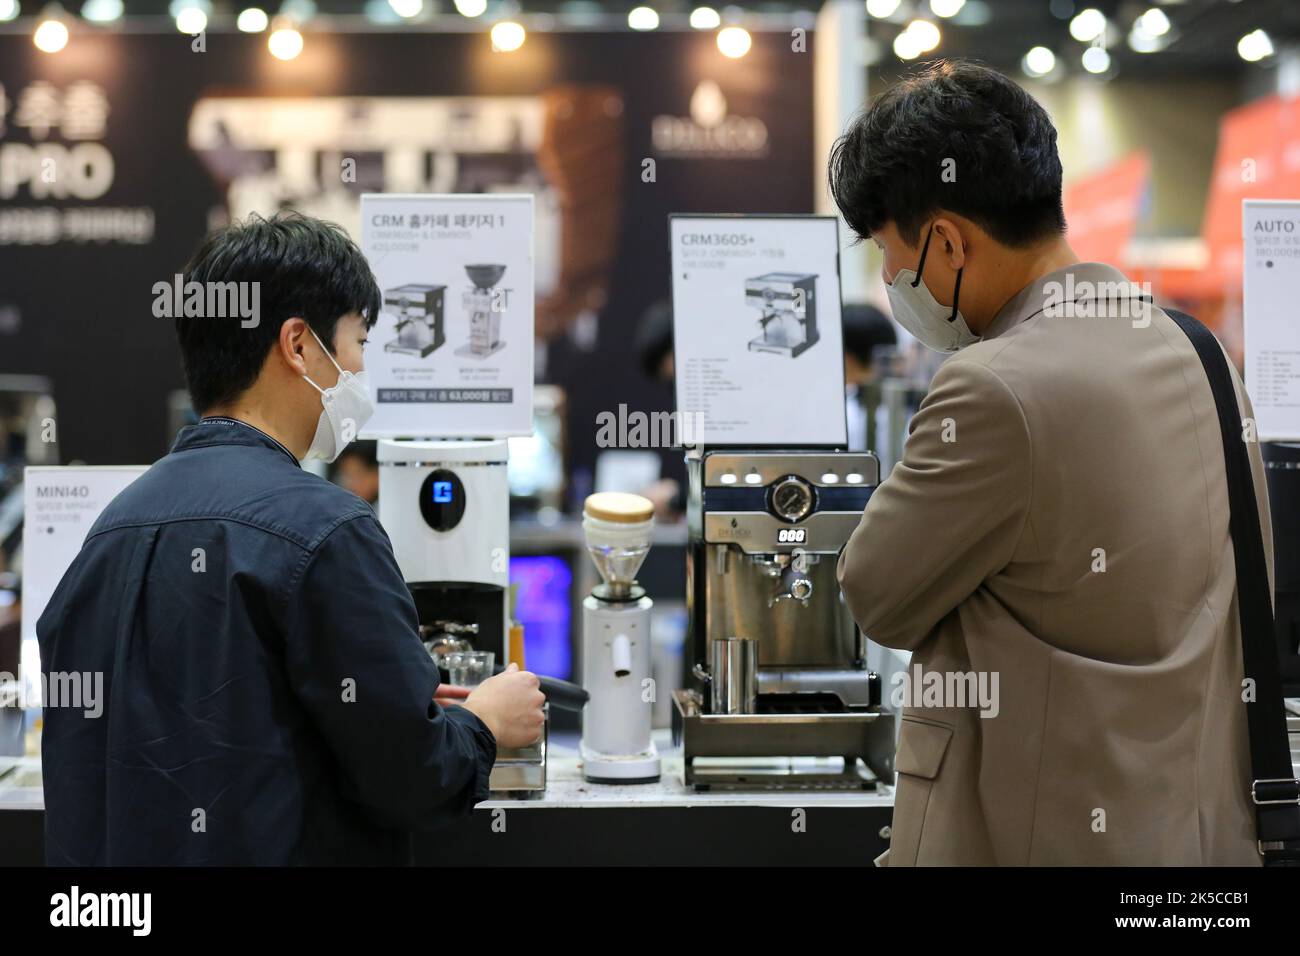 https://c8.alamy.com/comp/2K5CCB1/goyang-south-korea-7th-oct-2022-an-exhibitor-l-introduces-coffee-machines-to-a-visitor-at-the-cafe-and-bakery-fair-in-goyang-south-korea-oct-7-2022-the-fair-will-last-till-oct-9-credit-wang-yiliangxinhuaalamy-live-news-2K5CCB1.jpg